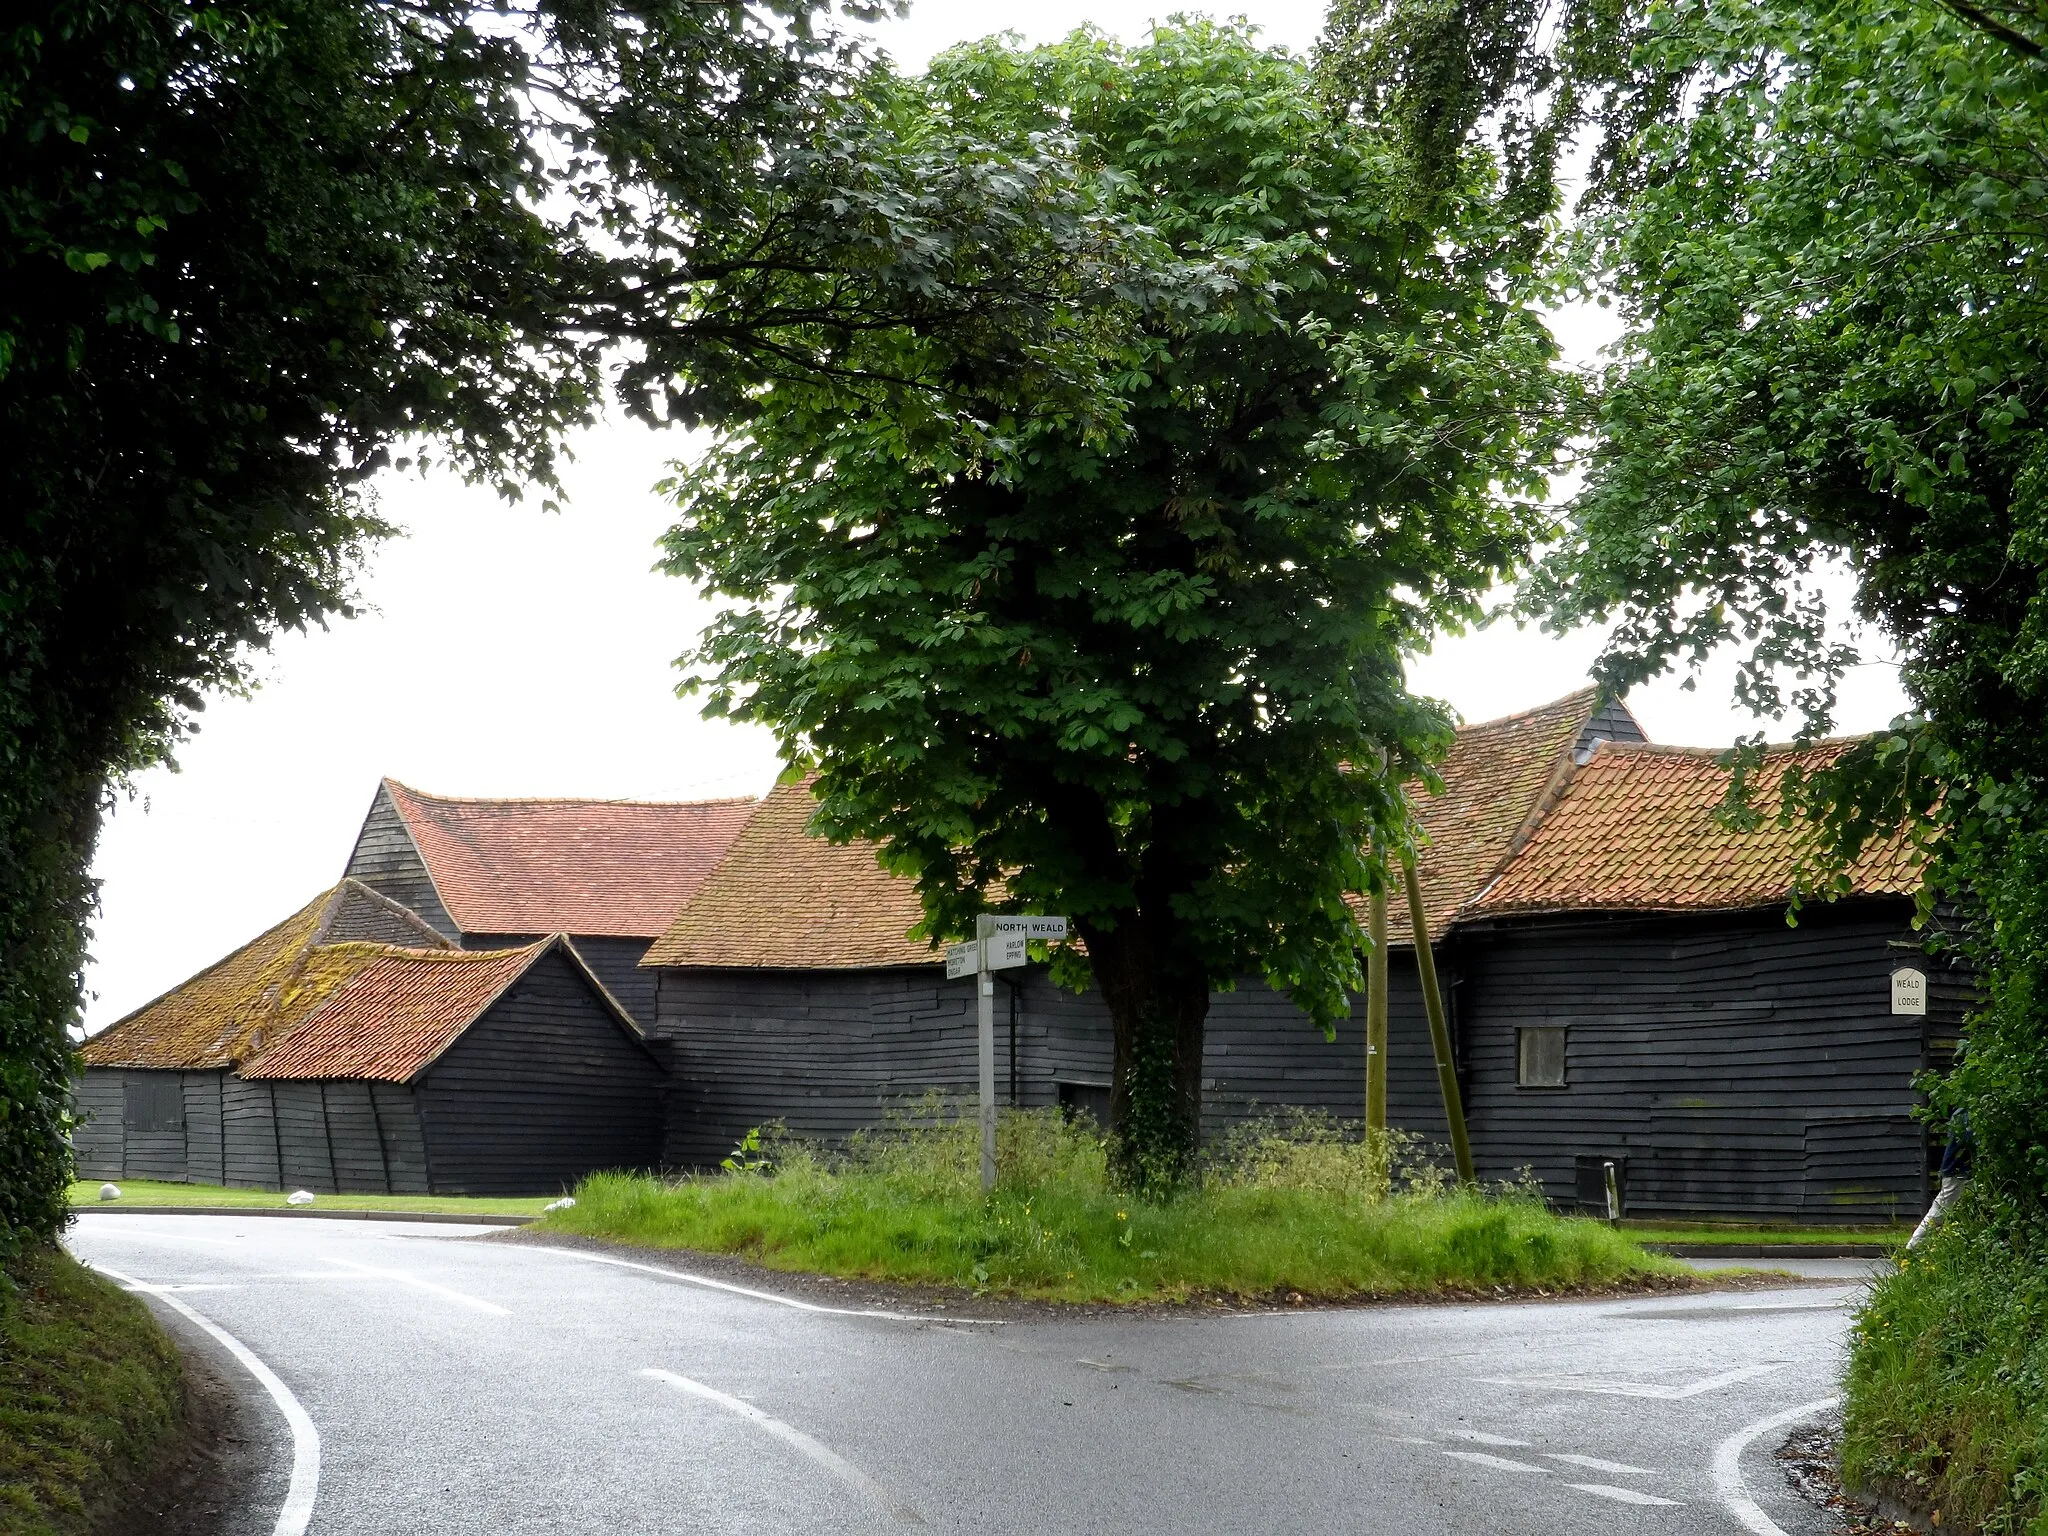 Photo showing: Barns at a junction of country lanes